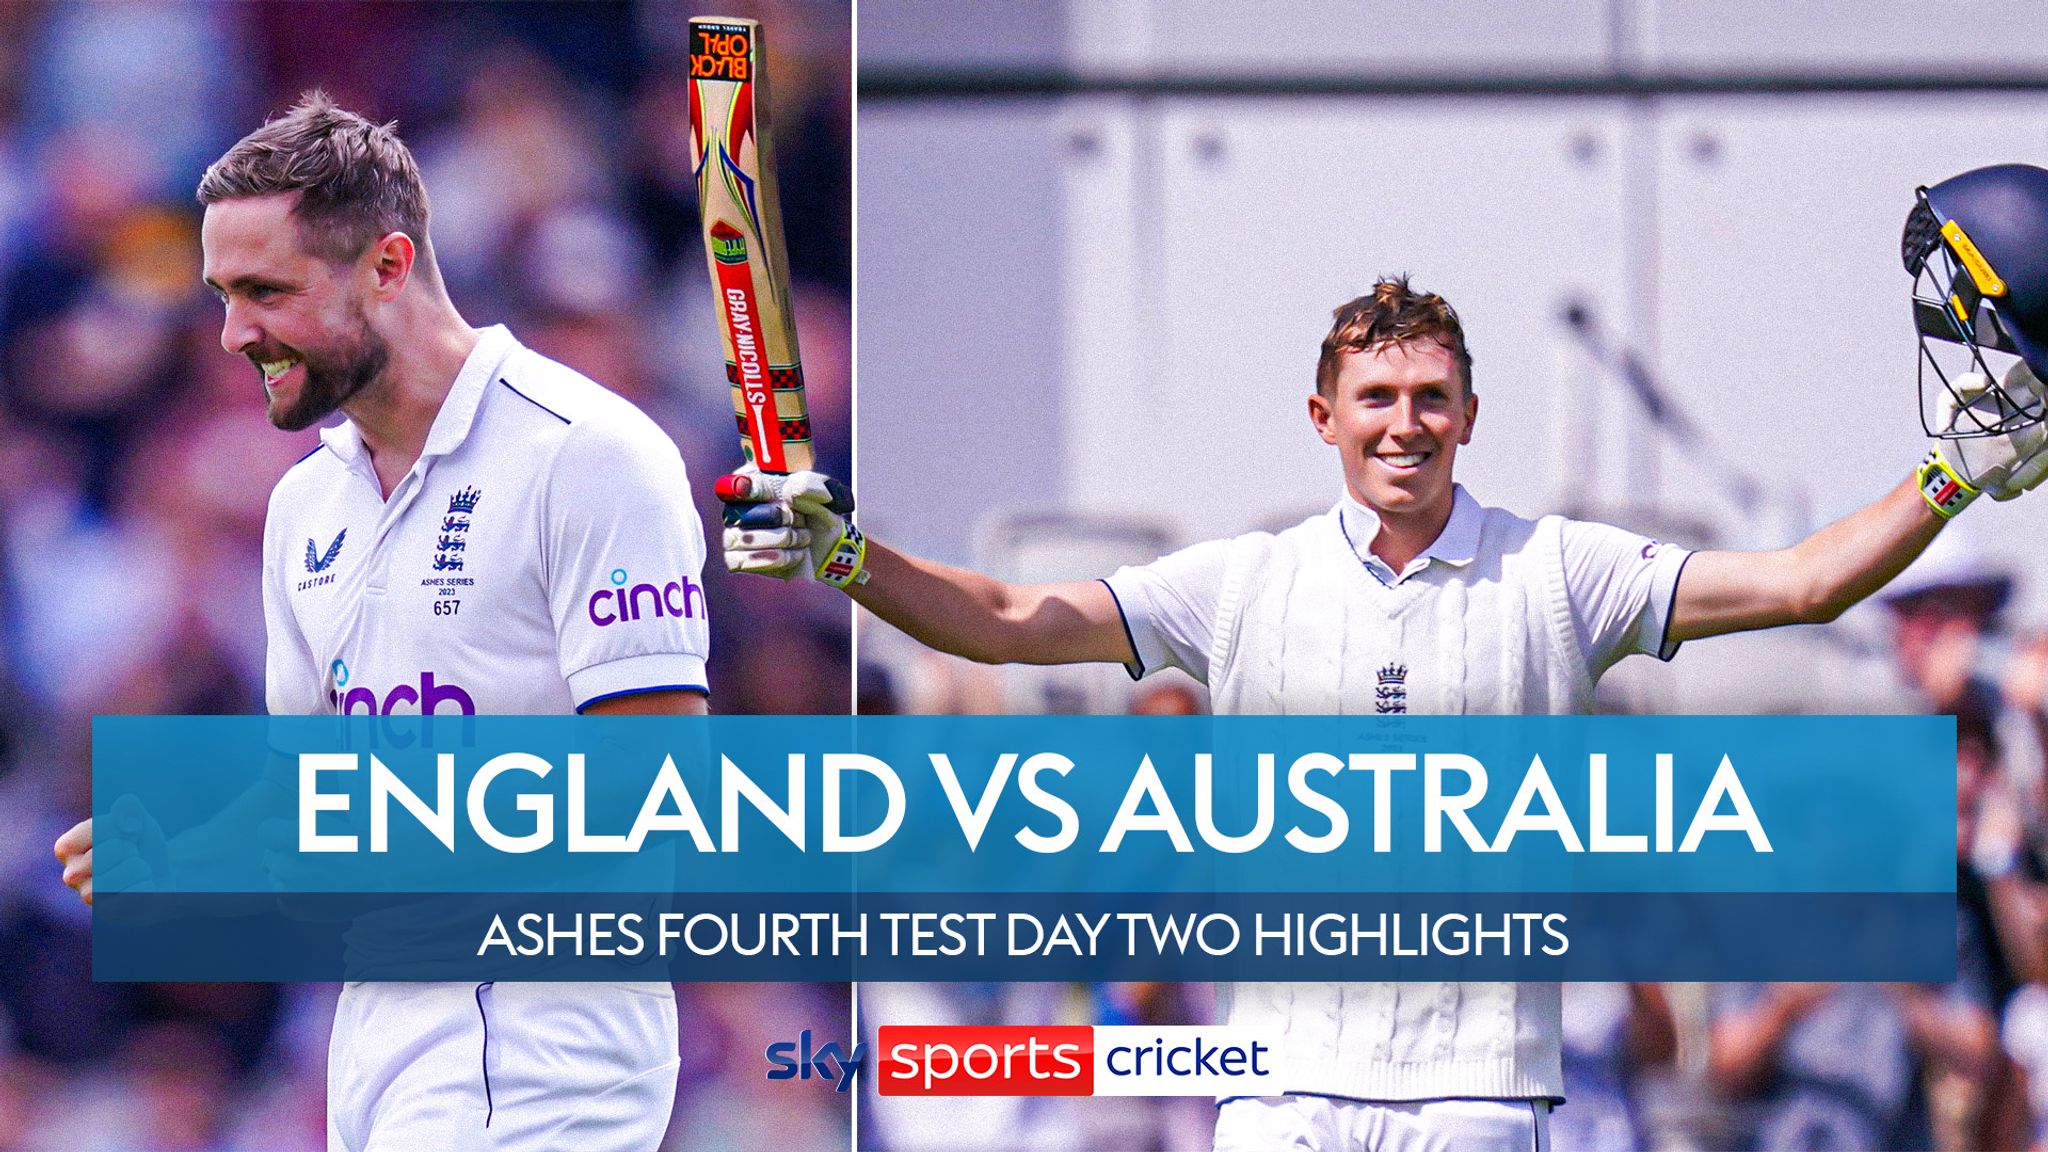 England vs Australia Day two, full highlights Video Watch TV Show Sky Sports